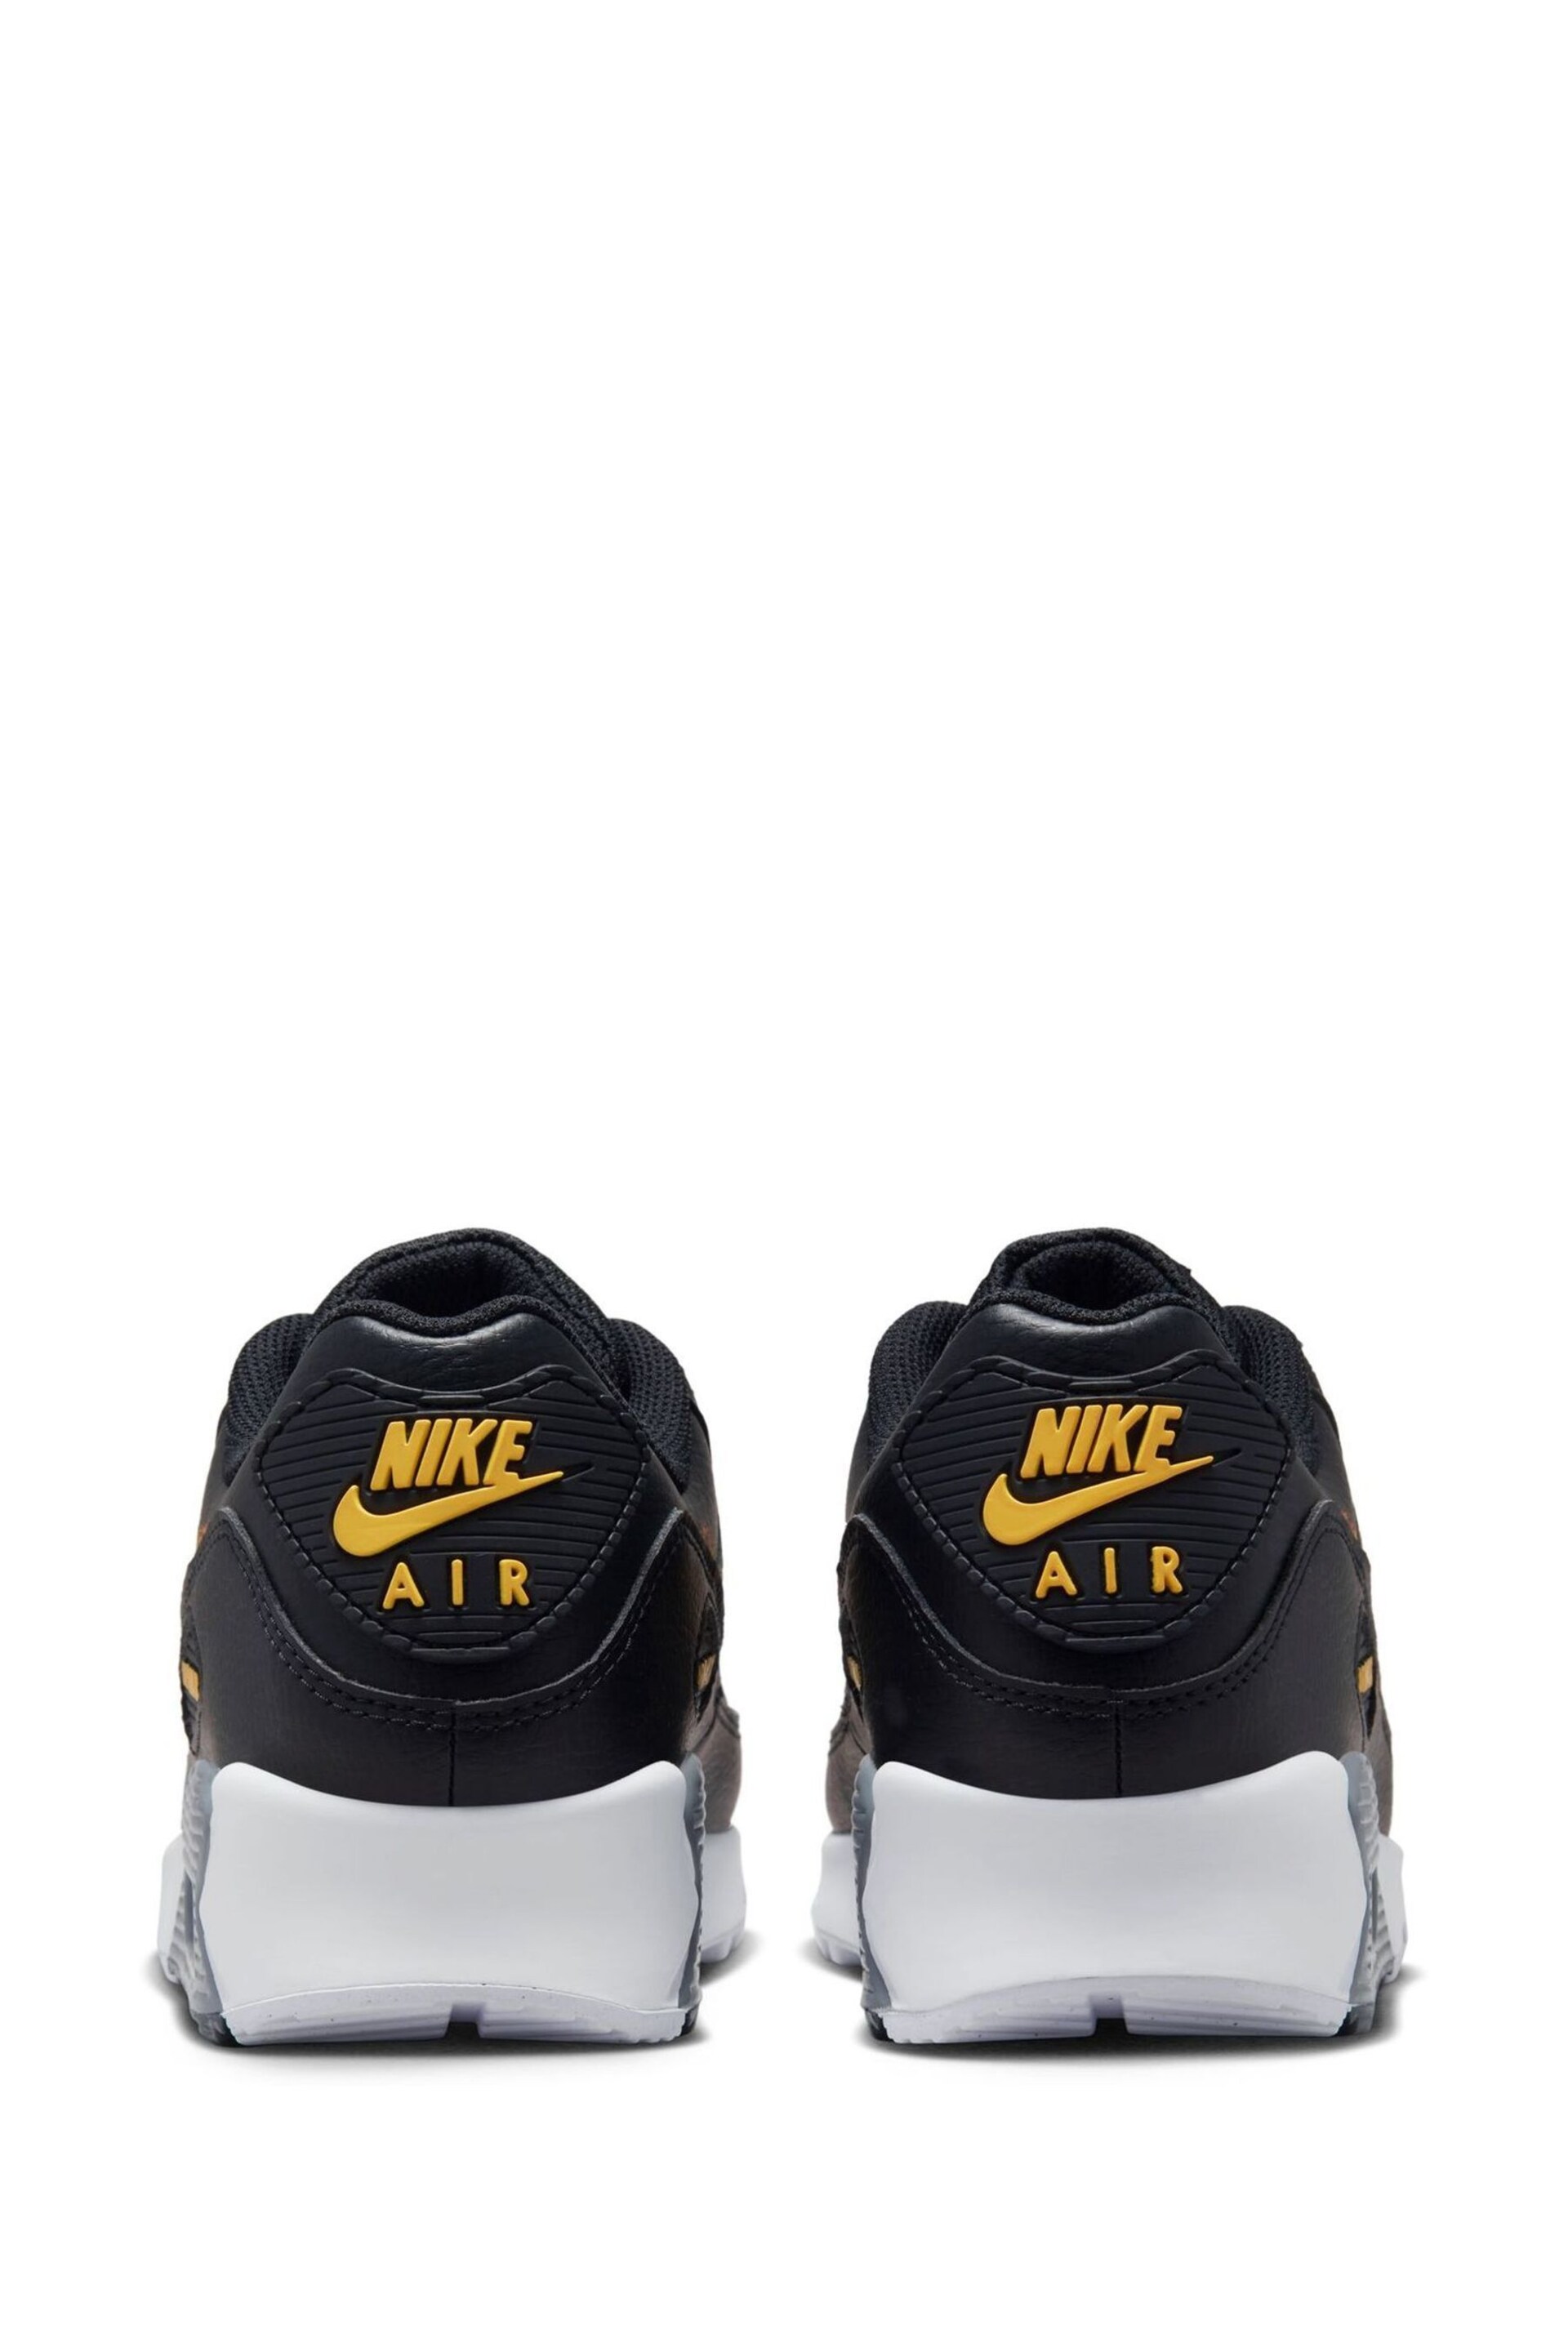 Nike Black/Gold Air Max 90 Trainers - Image 6 of 10